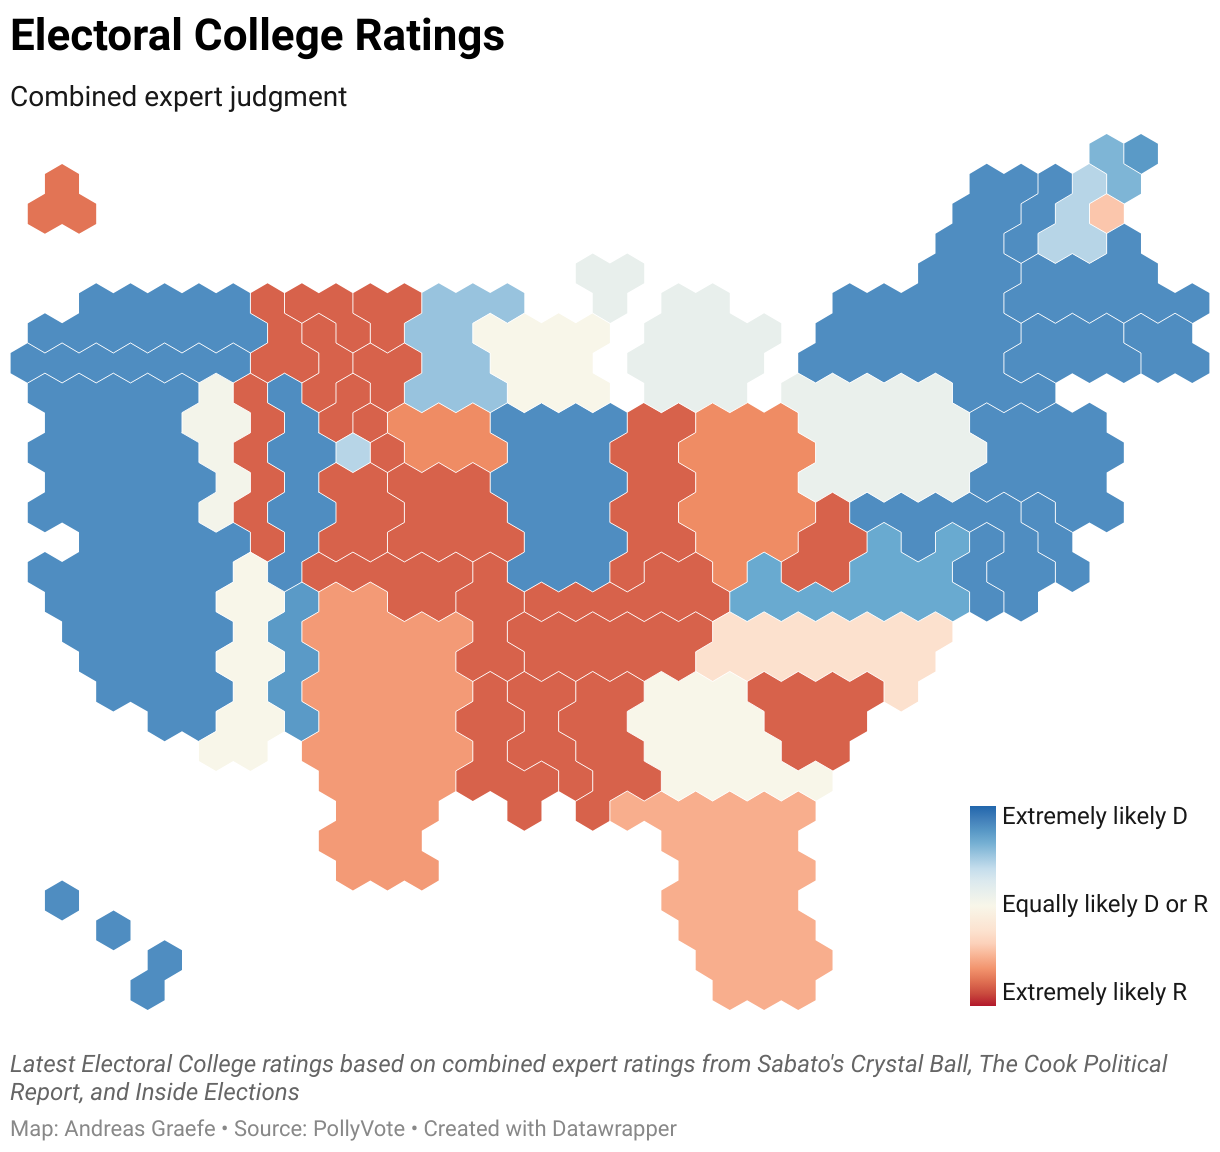 Latest Electoral College ratings based on combined expert ratings from Sabato's Crystal Ball, The Cook Political Report, and Inside Elections